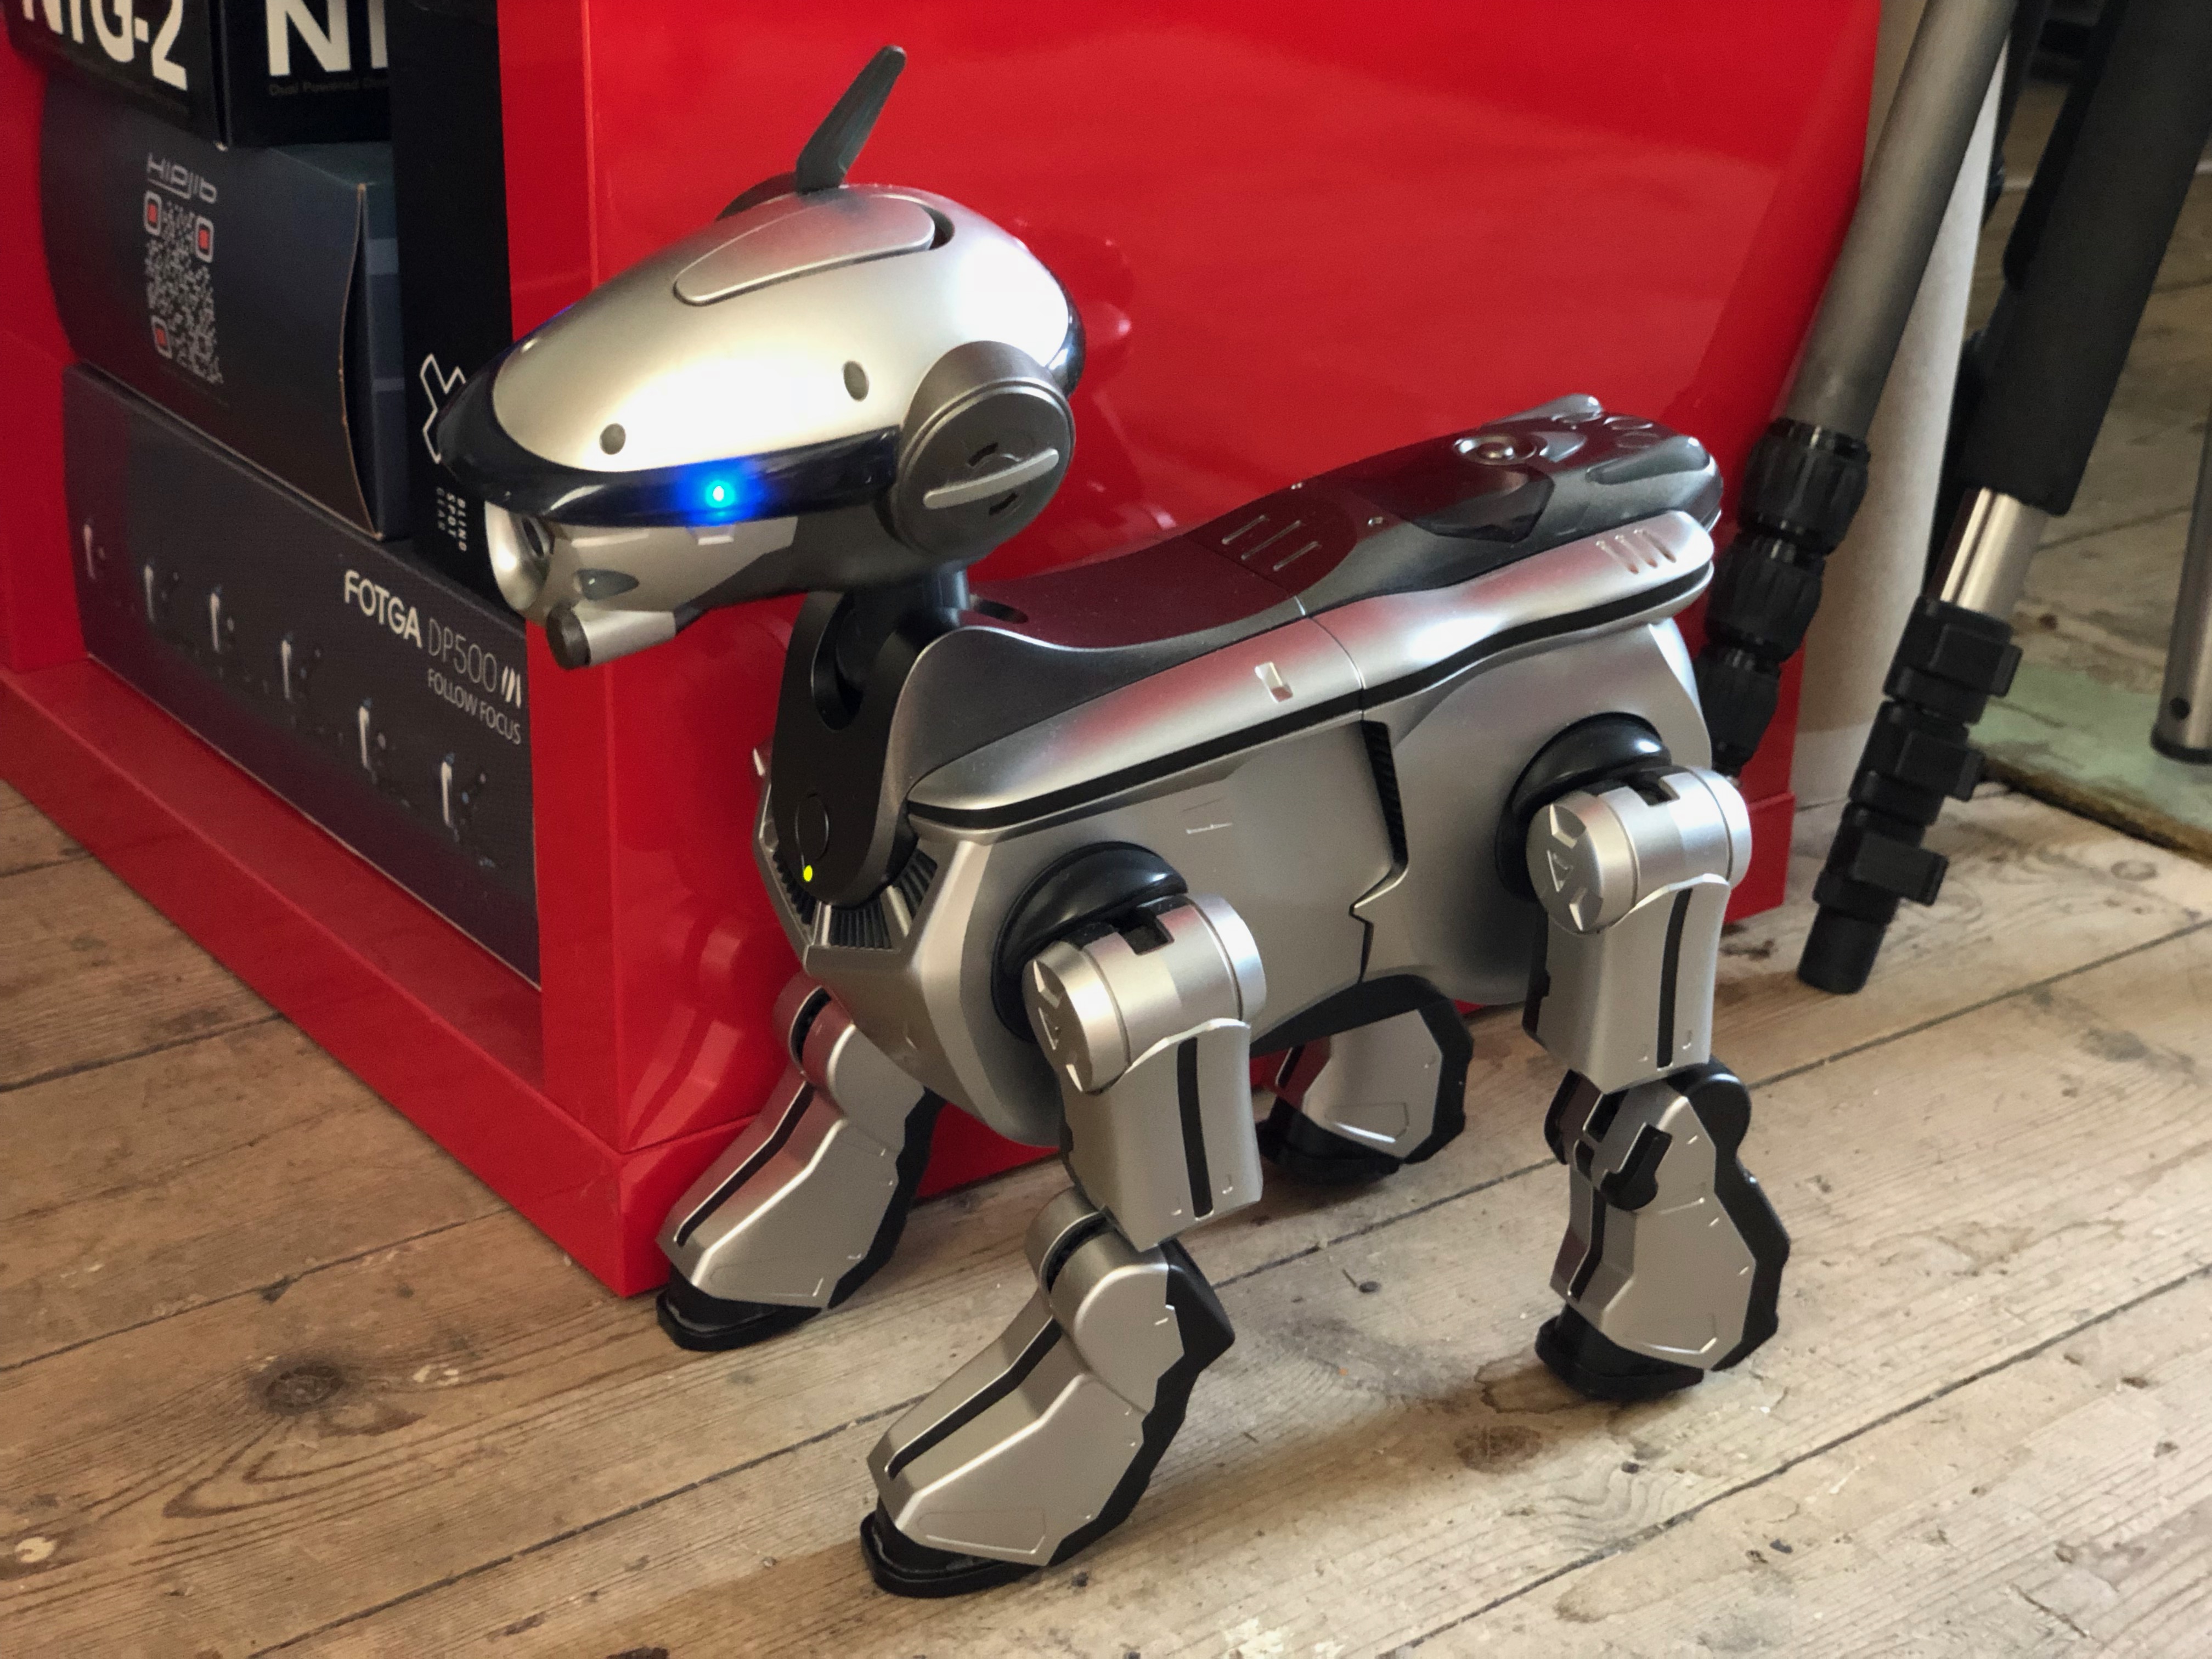 AIBO is back!